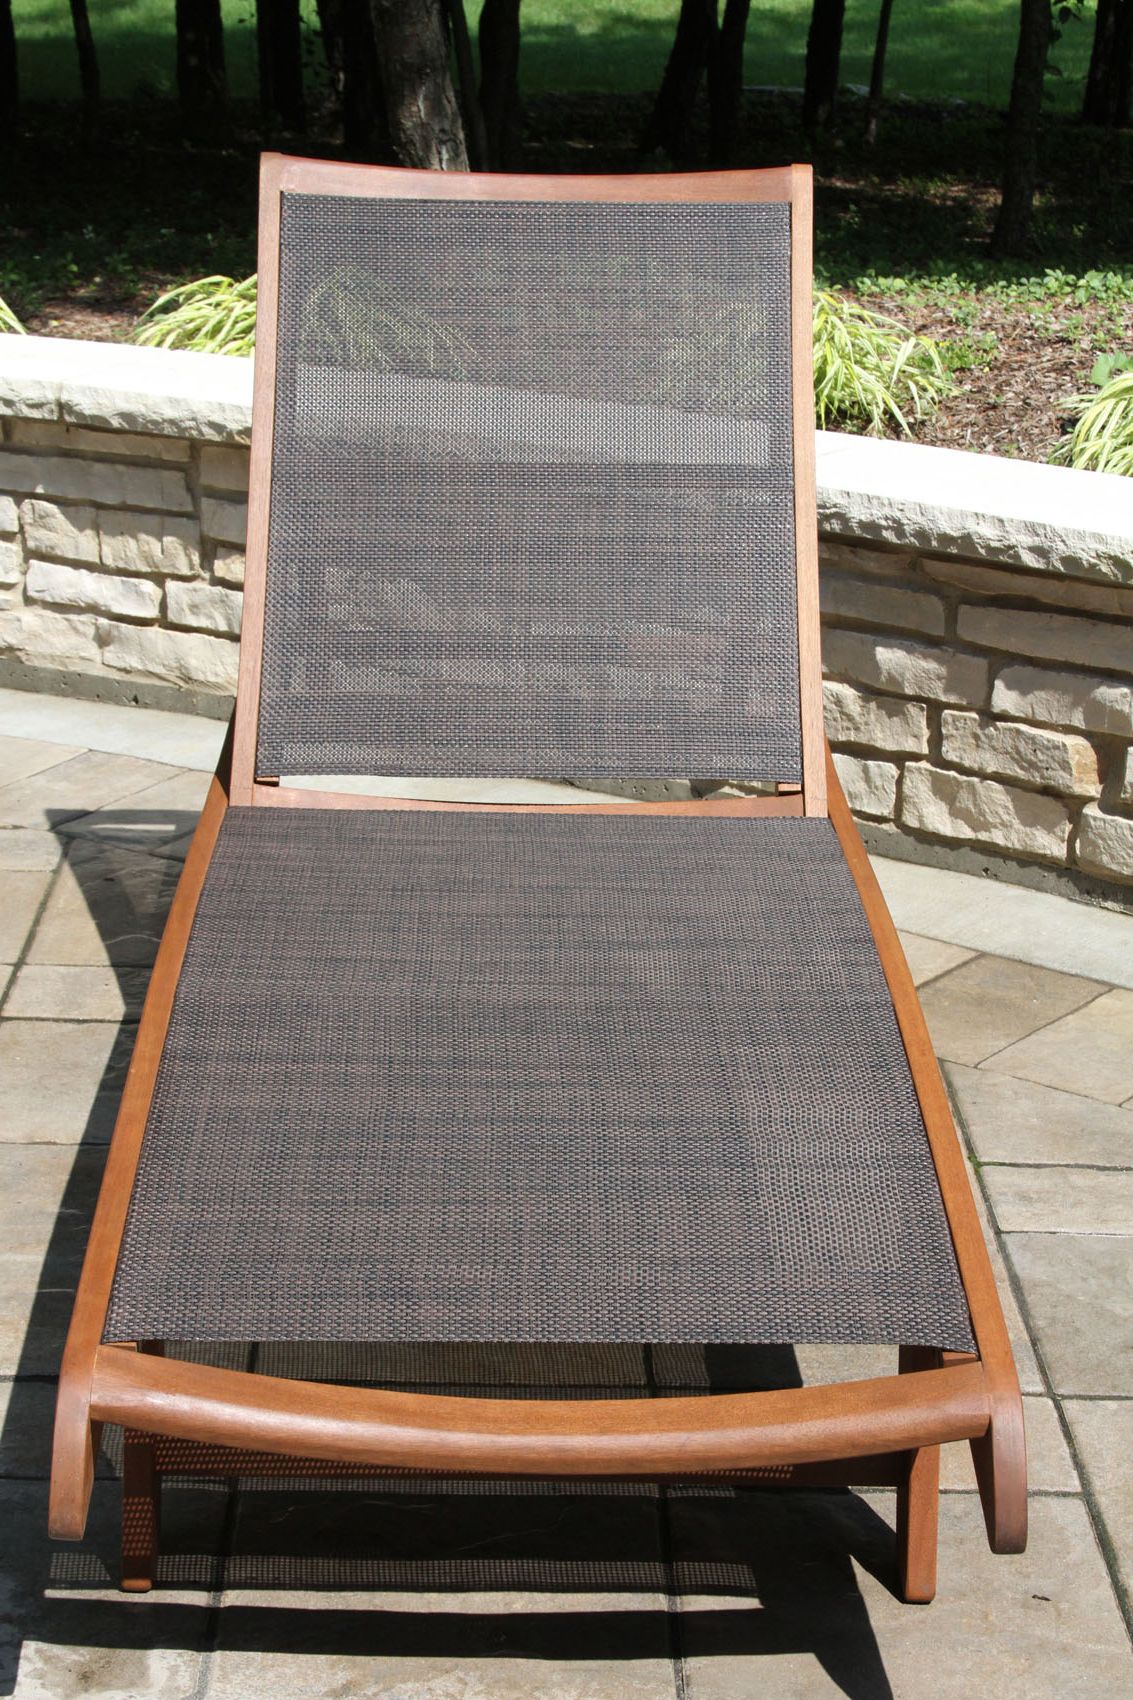 Eucalyptus Hardwood & Brown Sling Chaise Lounge Chair In Most Recent Outdoor Sling Eucalyptus Chaise Loungers (View 7 of 25)